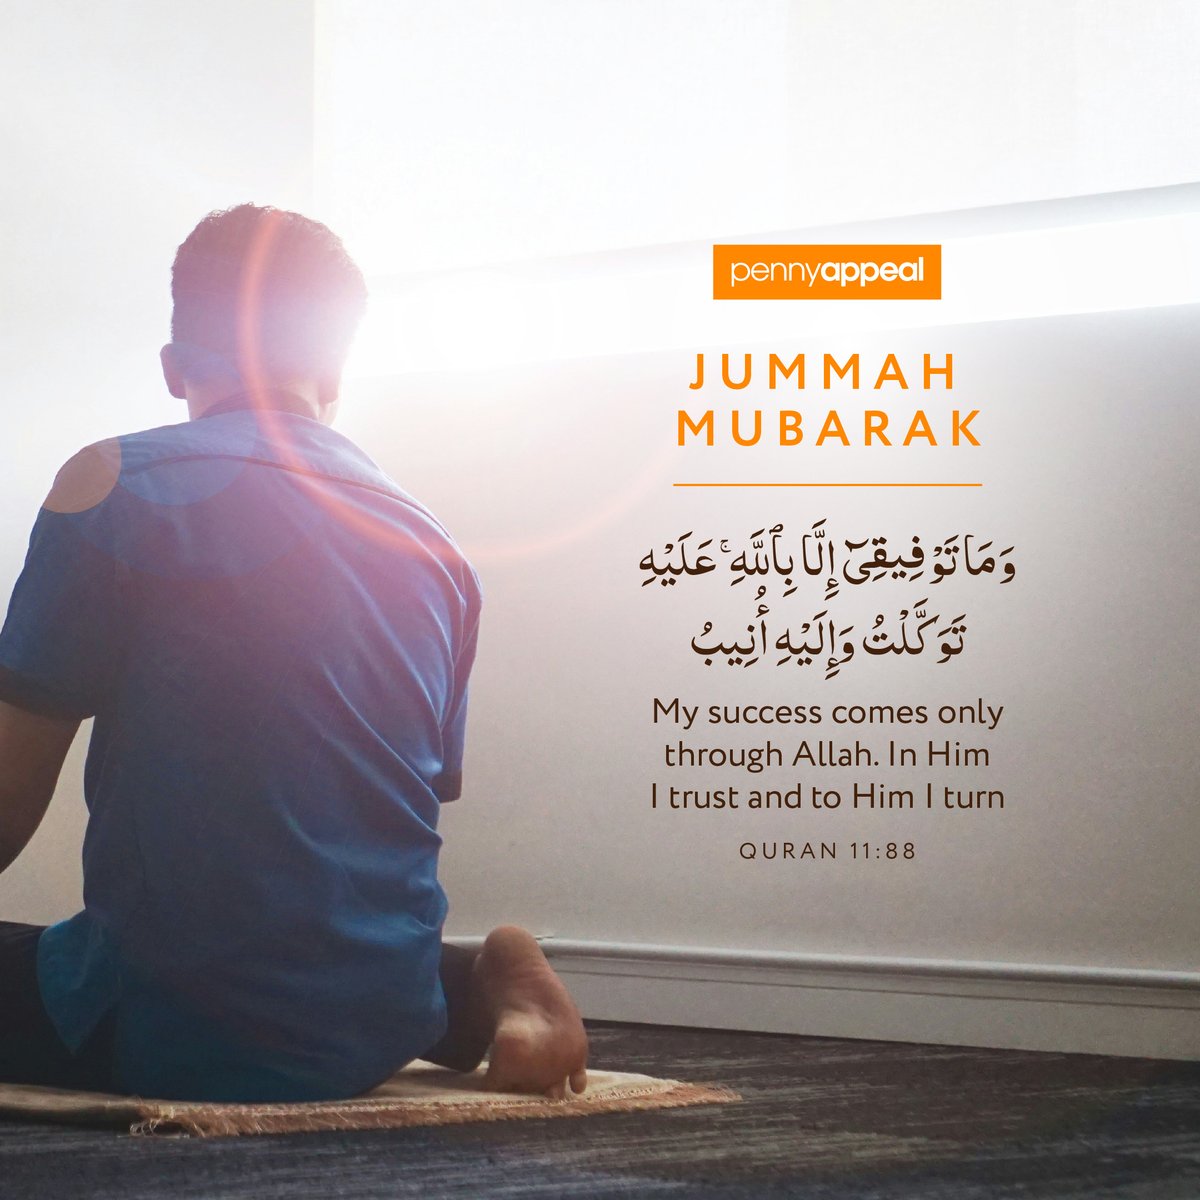 Jummah Mubarak. 🧡 True success comes only through the guidance of Allah (SWT). On this blessed day, and every day, let us trust in Him, and have faith in His infinite plan - Ameen. #JummahMubarak #TrustInAllah #Muslim #Jummah #Prayer